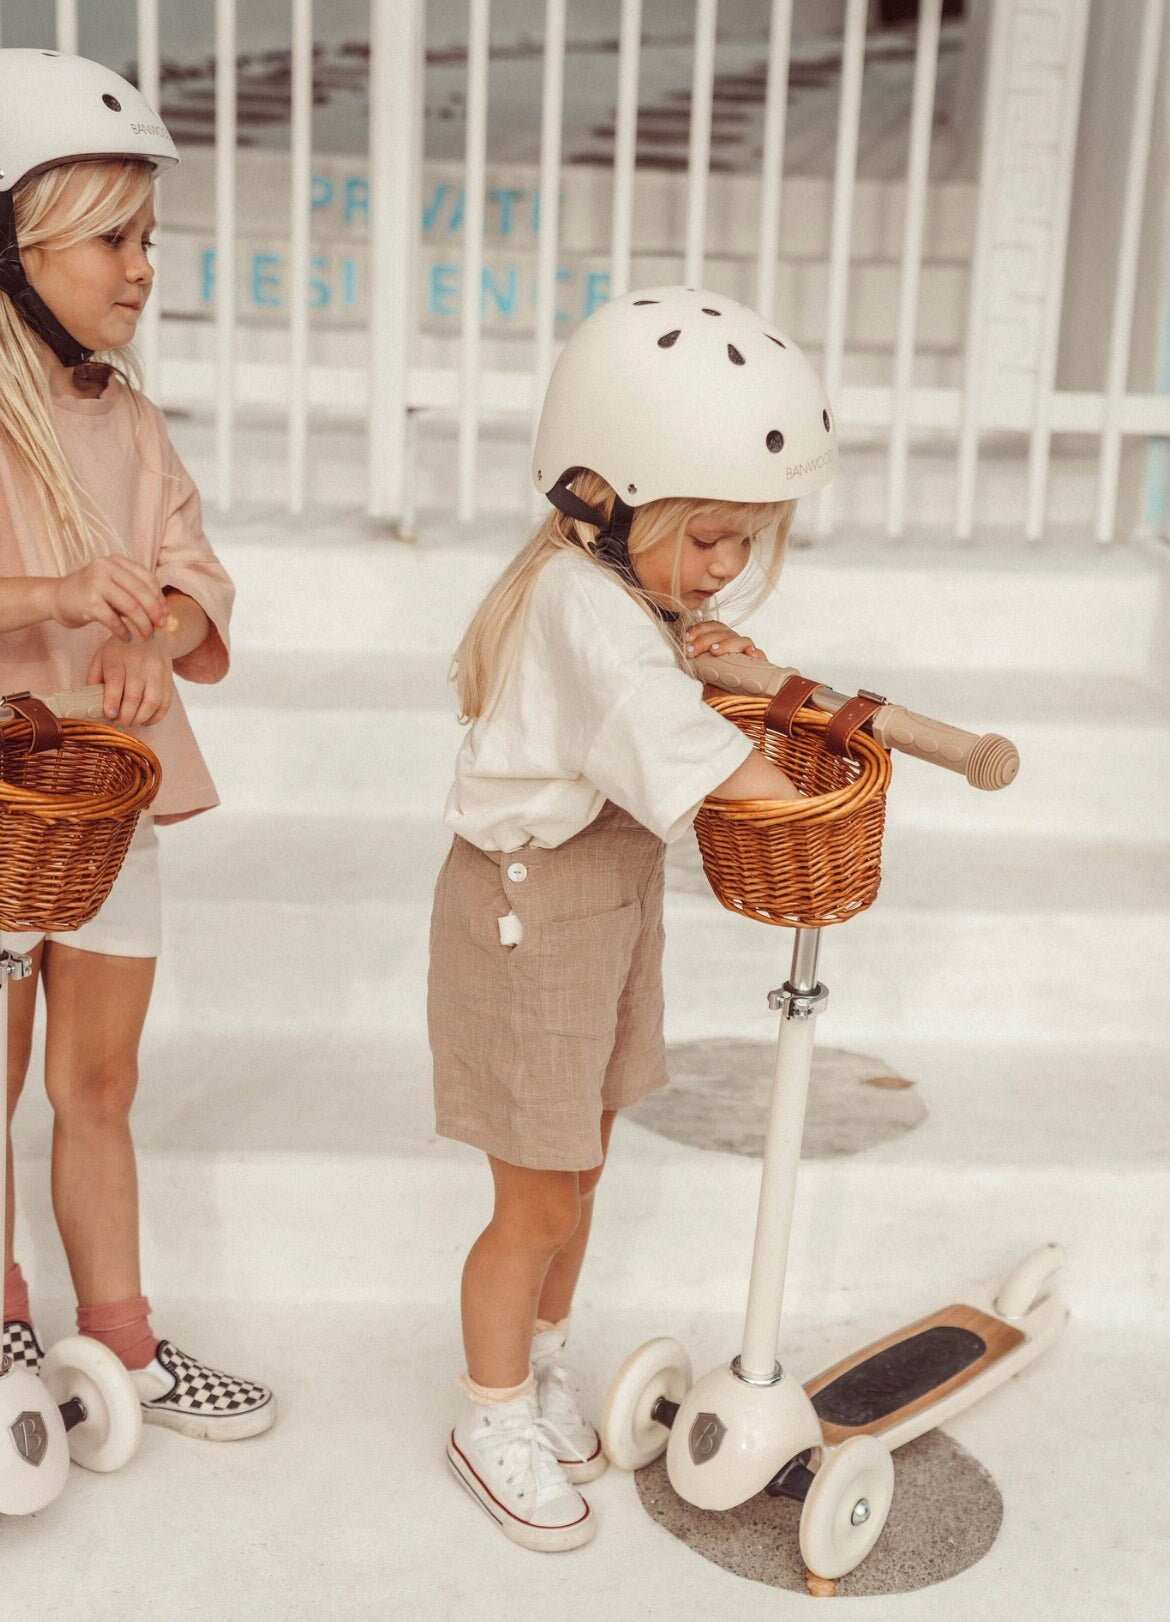 Banwood | Scandinavian Style Scooter | Kick Scooter | White Scooter Riding Toys - Alder & Alouette